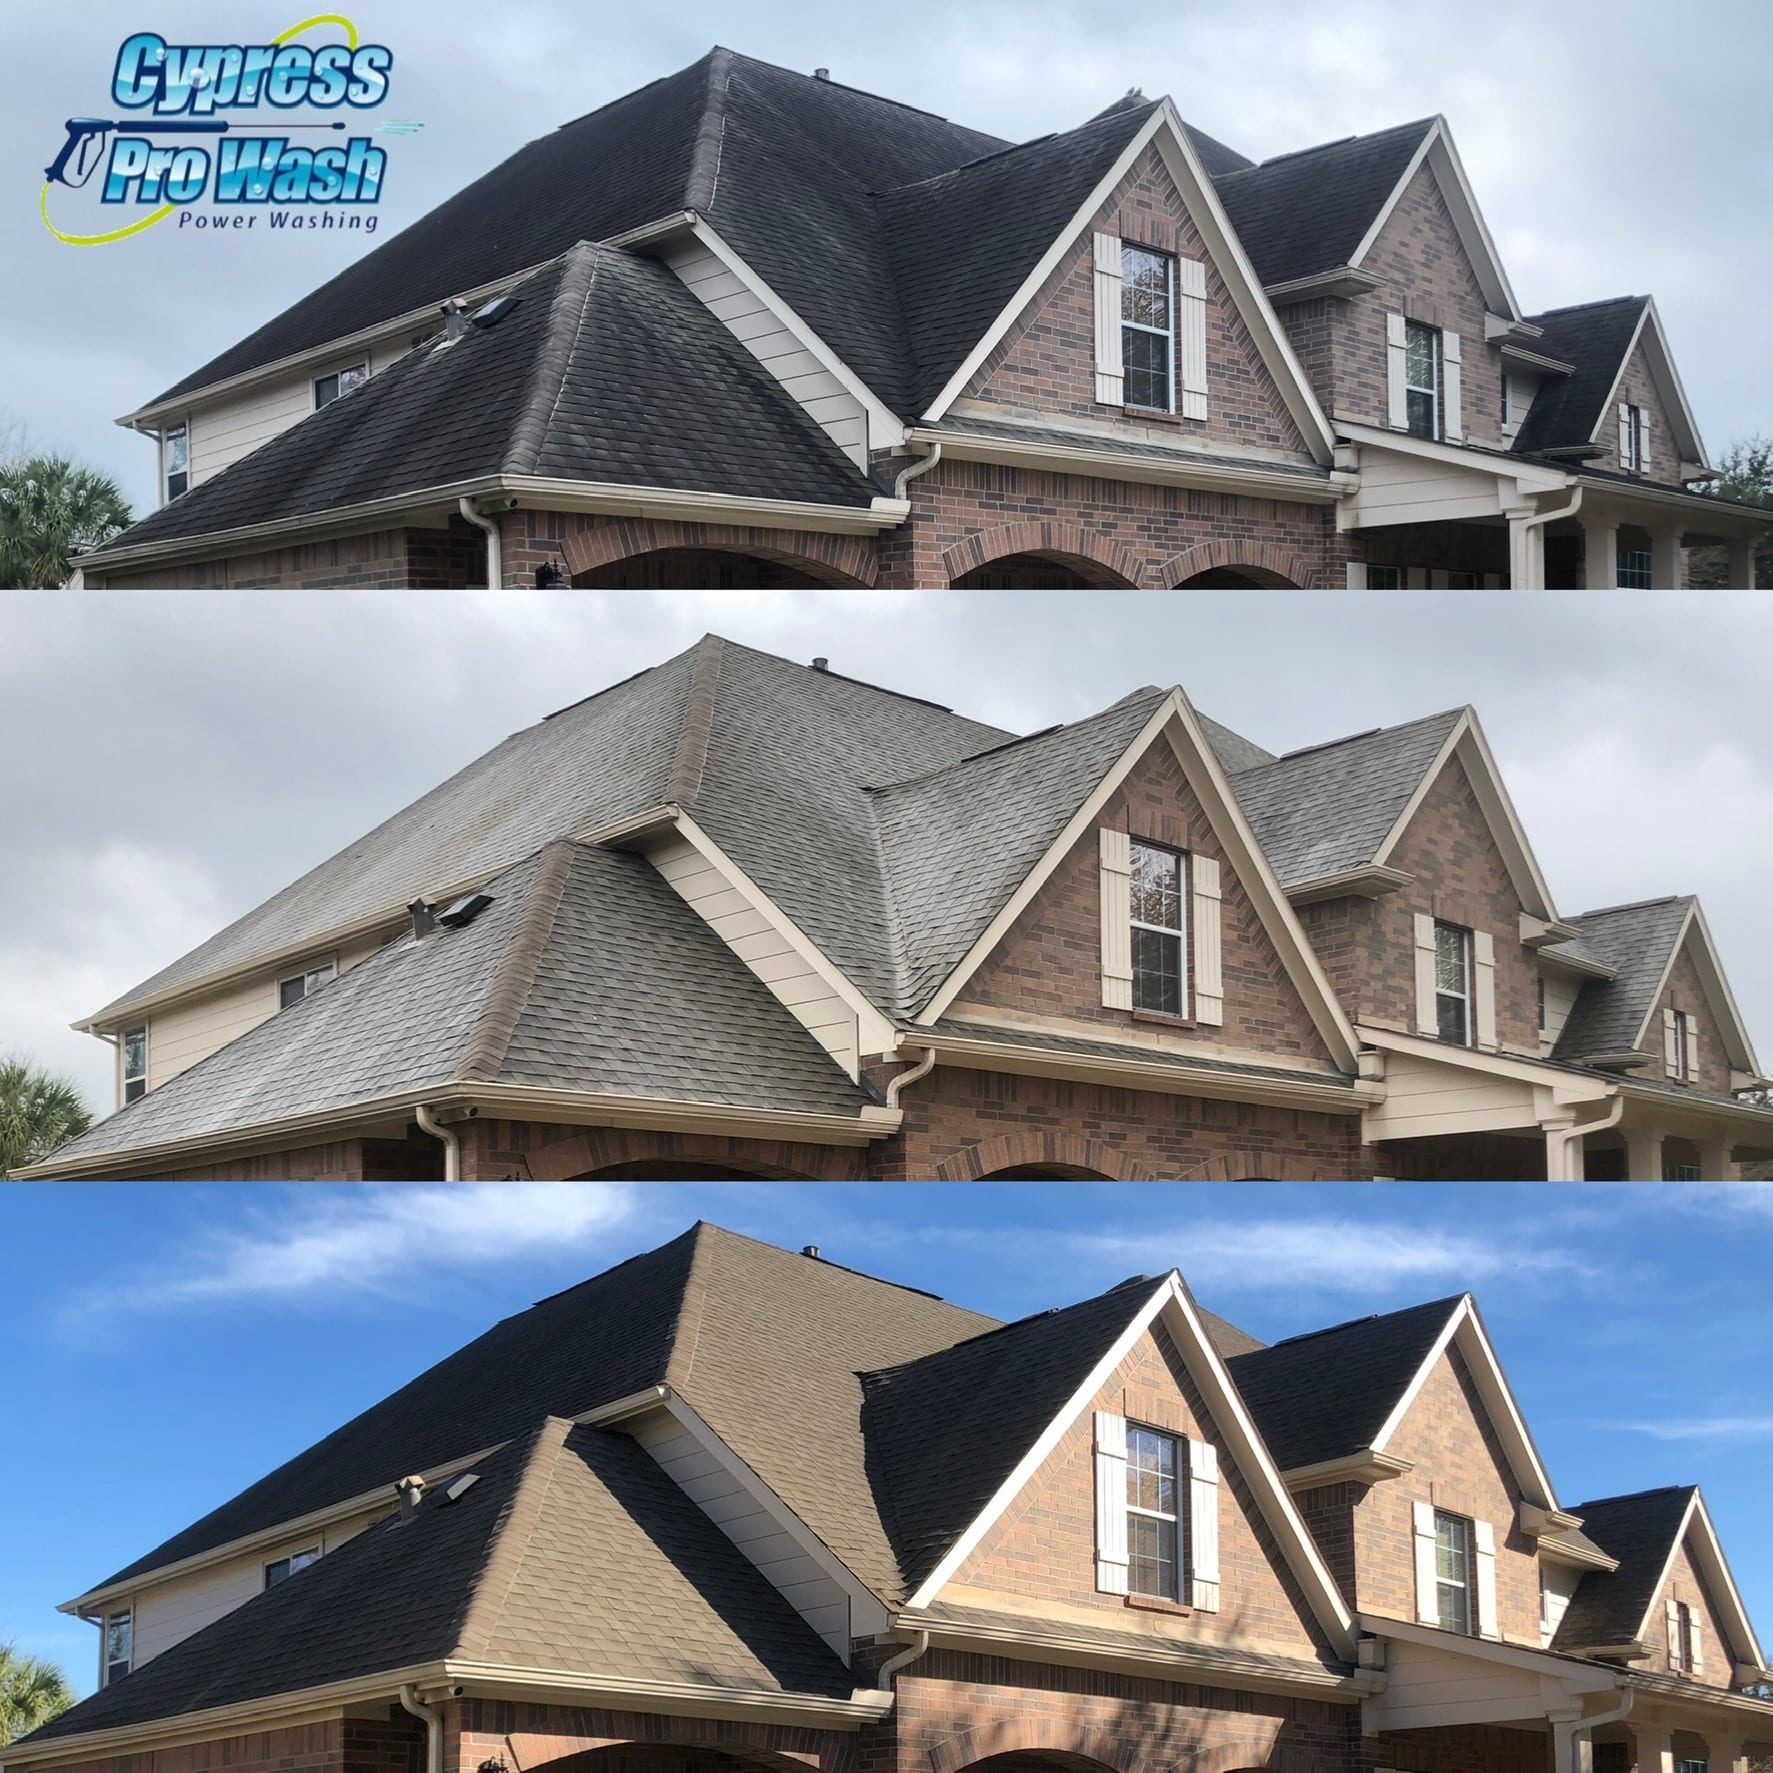 Before & After Roof Cleaning In Cypress, TX